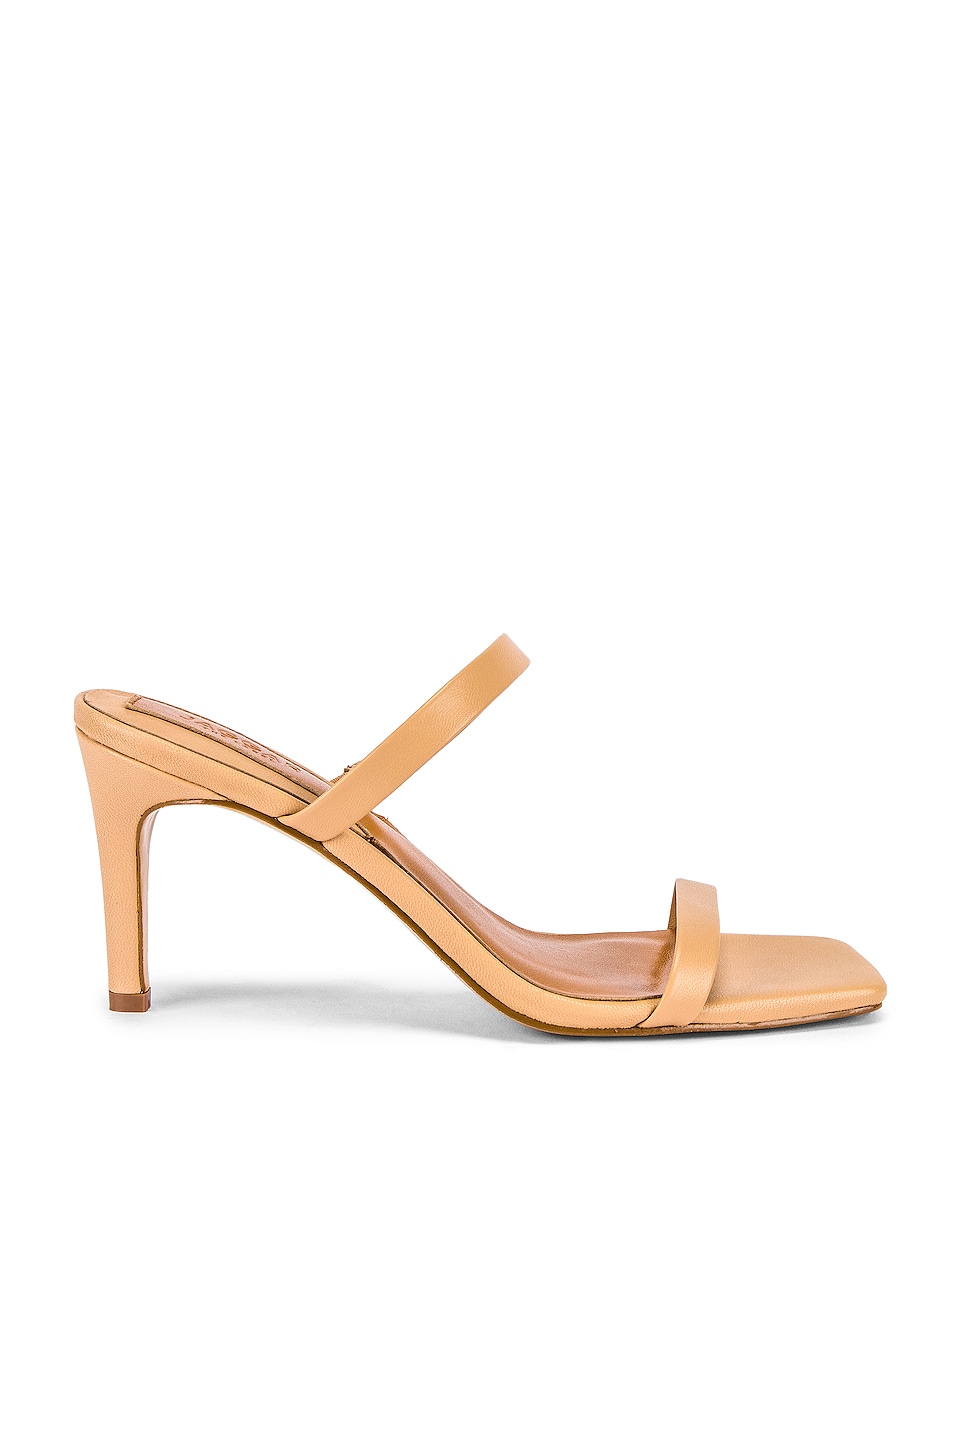 JAGGAR Two Strap Leather Sandal in Amberlight | REVOLVE